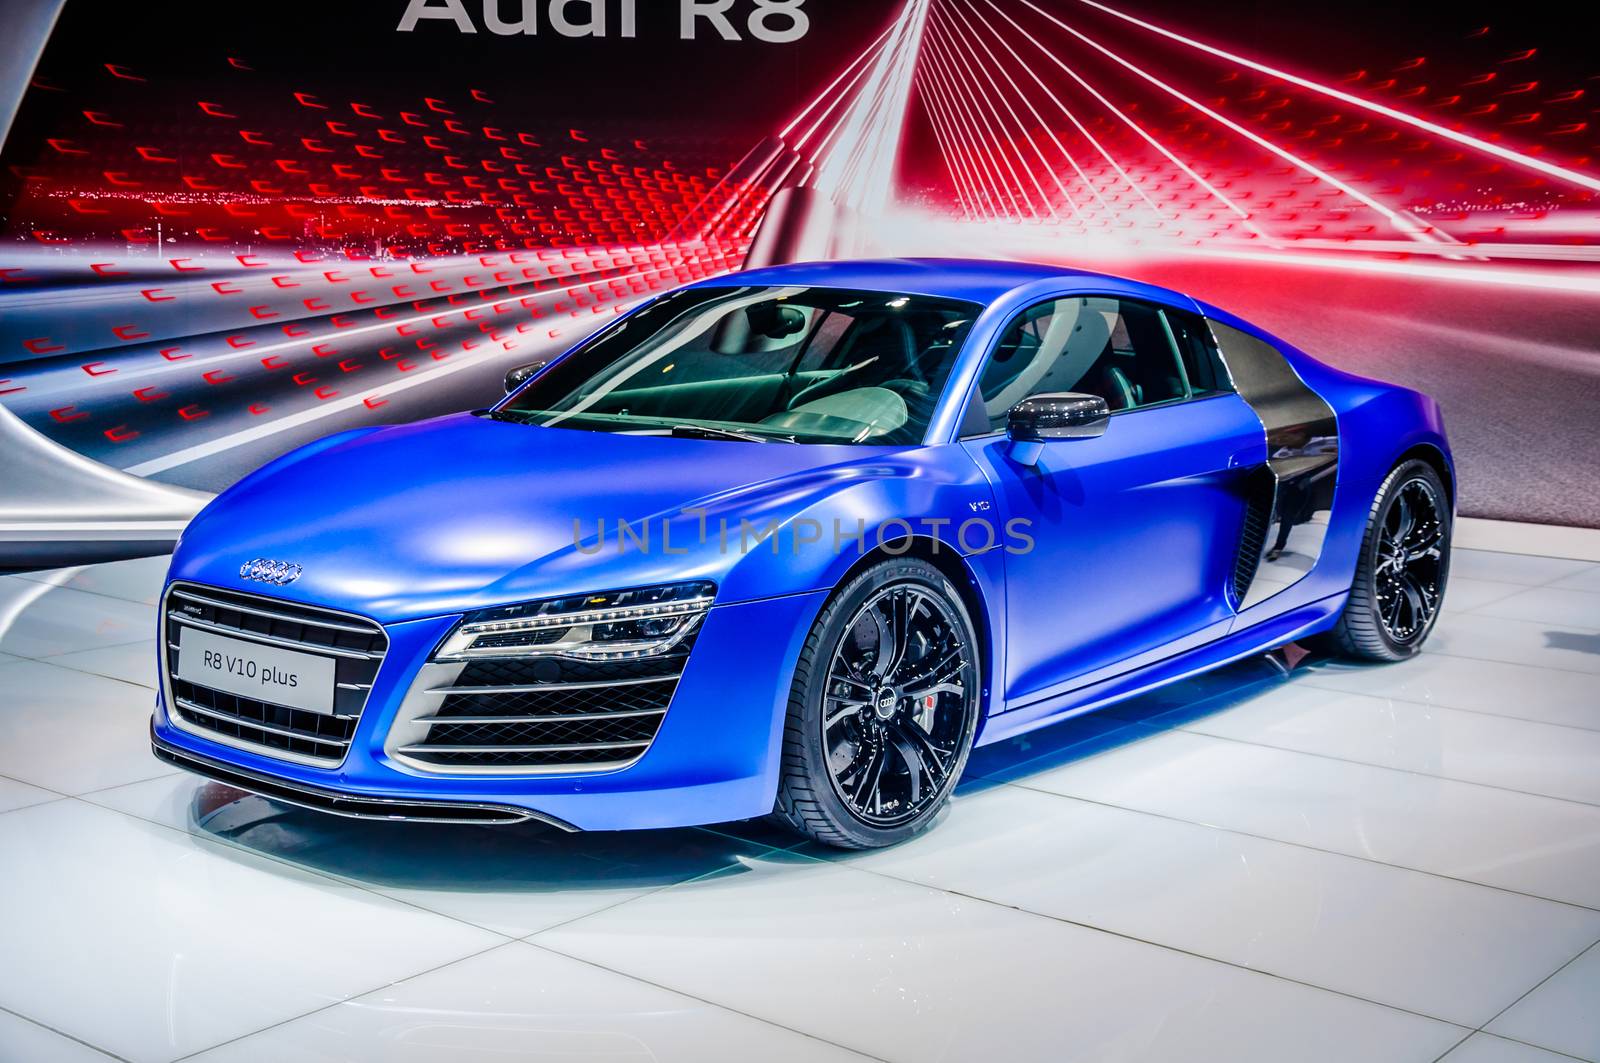 MOSCOW, RUSSIA - AUG 2012: AUDI R8 V10 PLUS presented as world premiere at the 16th MIAS (Moscow International Automobile Salon) on August 30, 2012 in Moscow, Russia